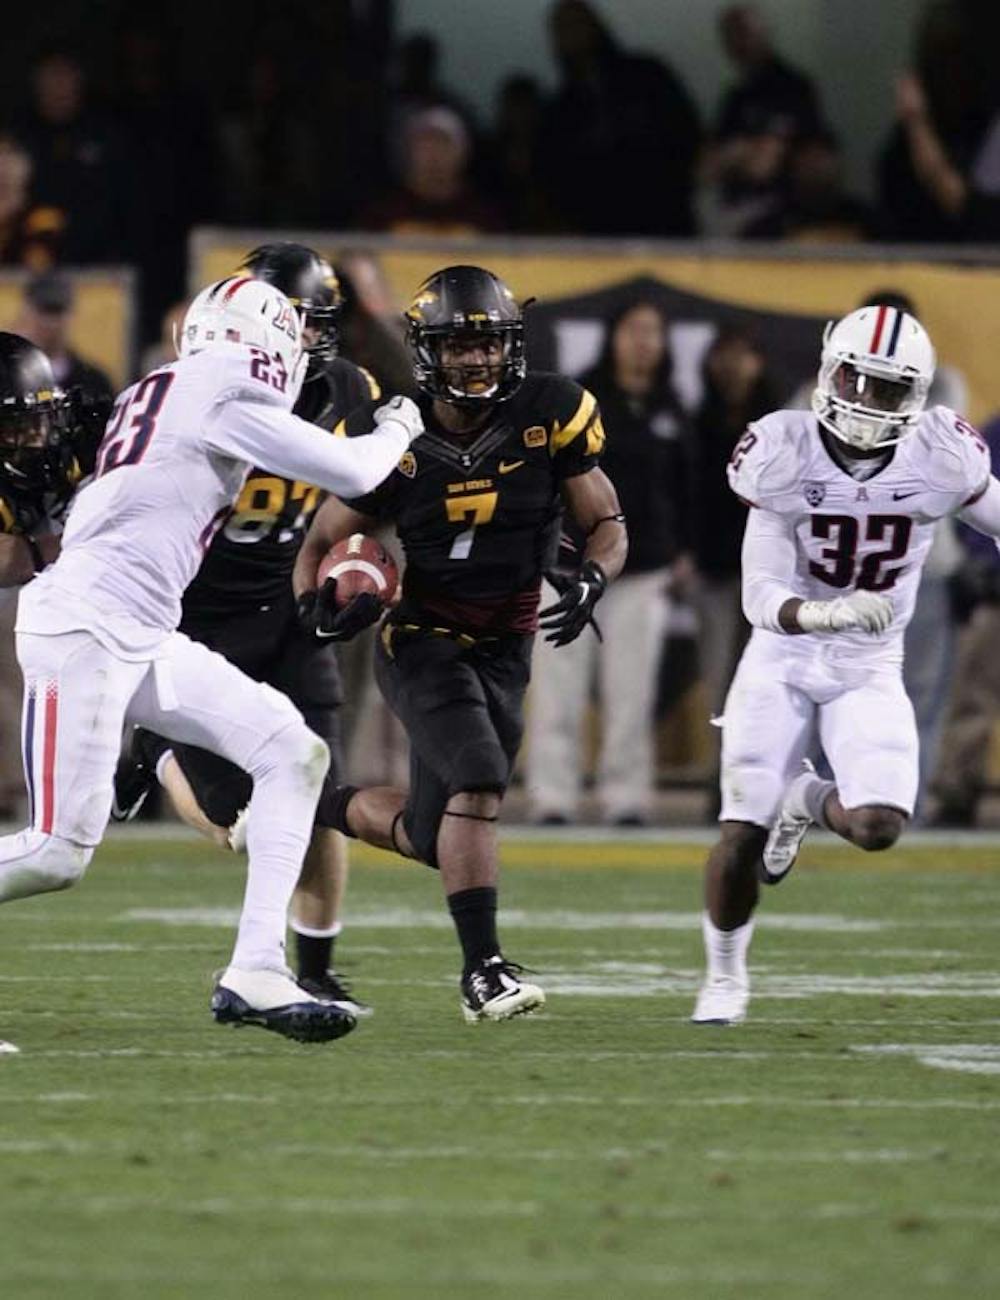 Junior wide receiver Kyle Middlebrooks (7) tries to run past a UA defender during the Sun Devils’ home game against the Wildcats on Sept. 5, 2012. Now a redshirt senior, Middlebrooks looks to mentor a reinvigorated special teams unit and be more productive on punt and kickoff returns. (Photo by Beth Easterbrook)

